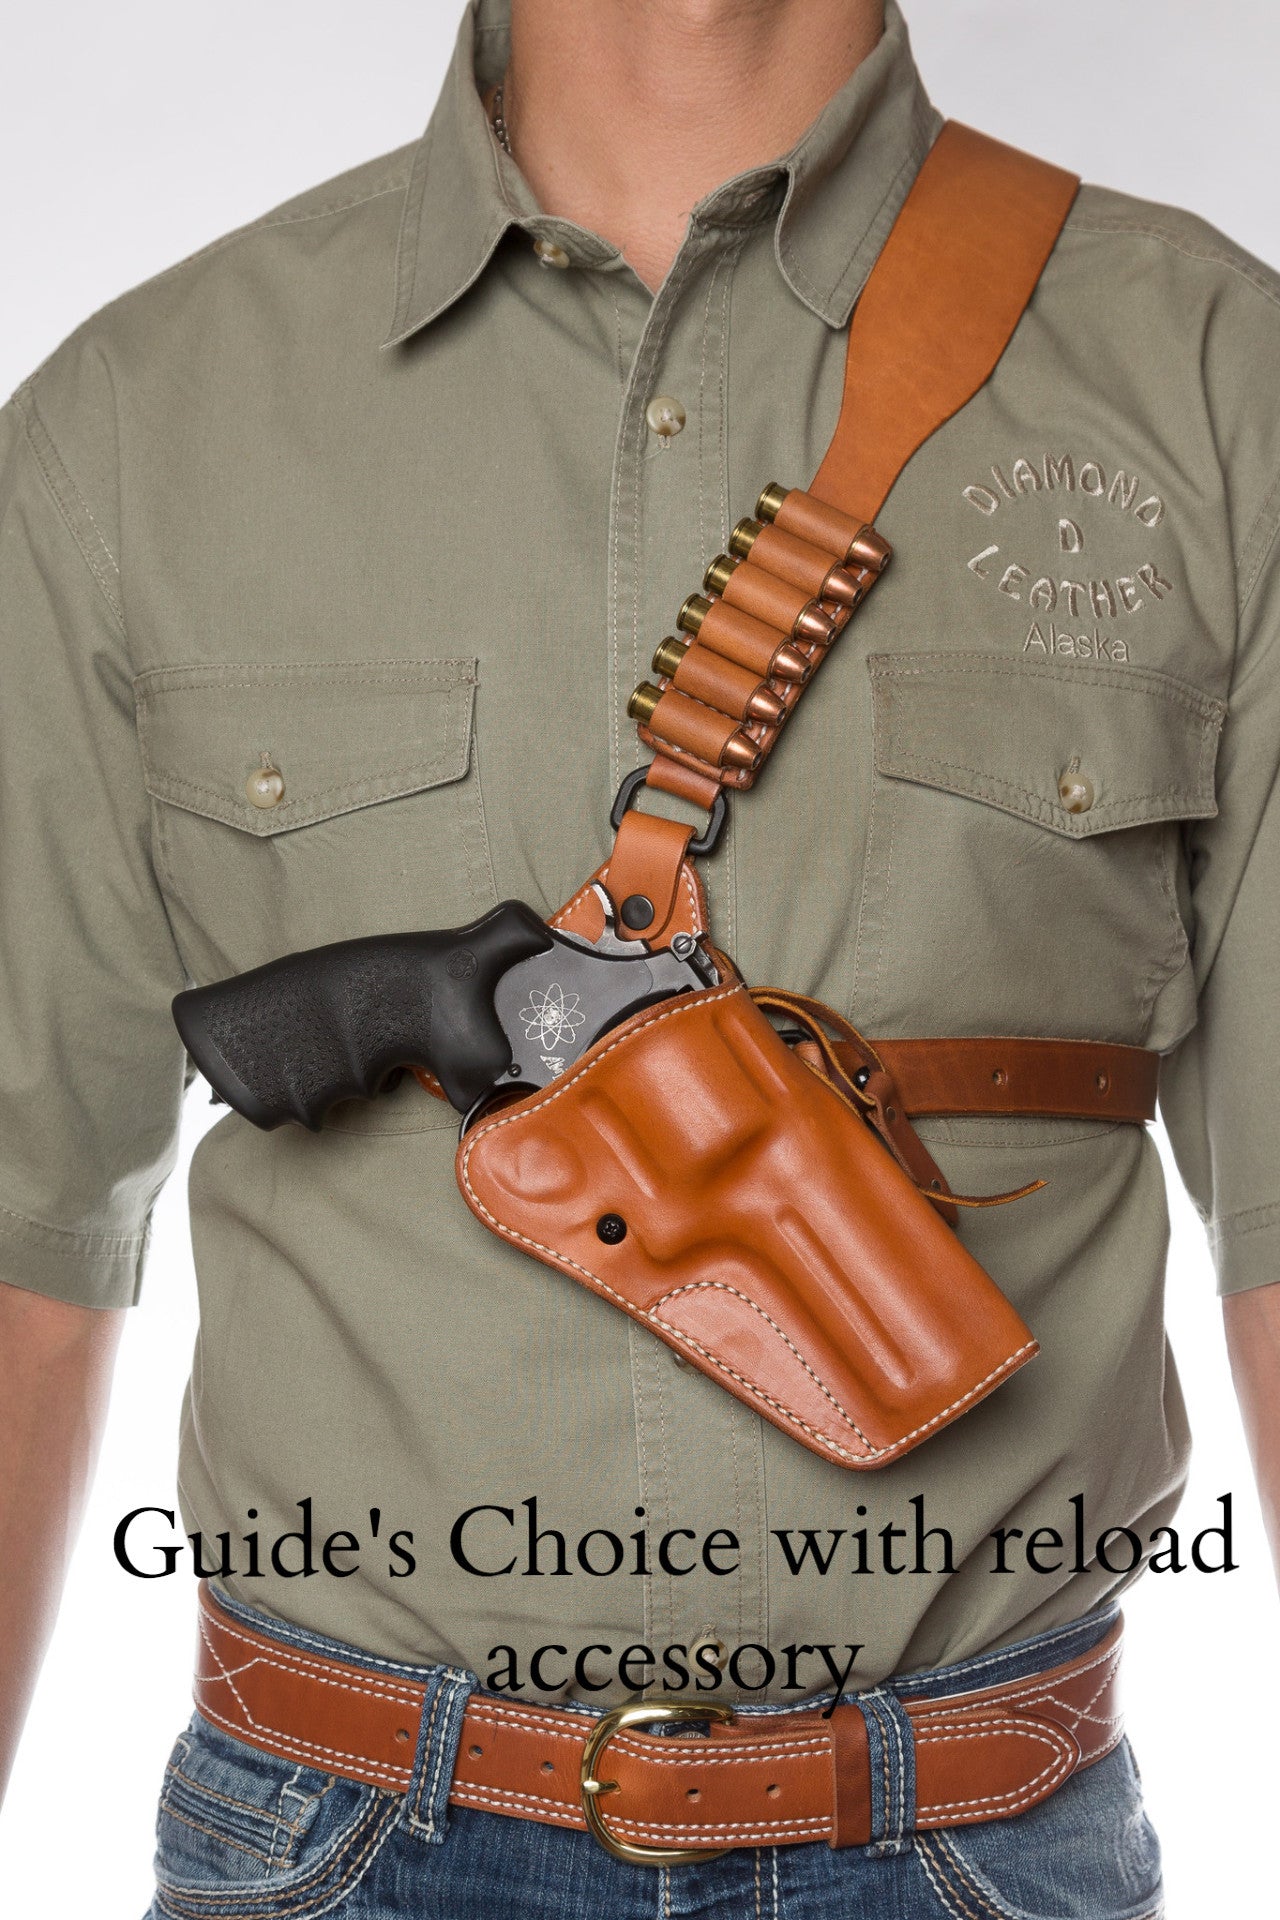 Best Concealed Carry Holsters for Women (Review & Buying Guide) in 2023